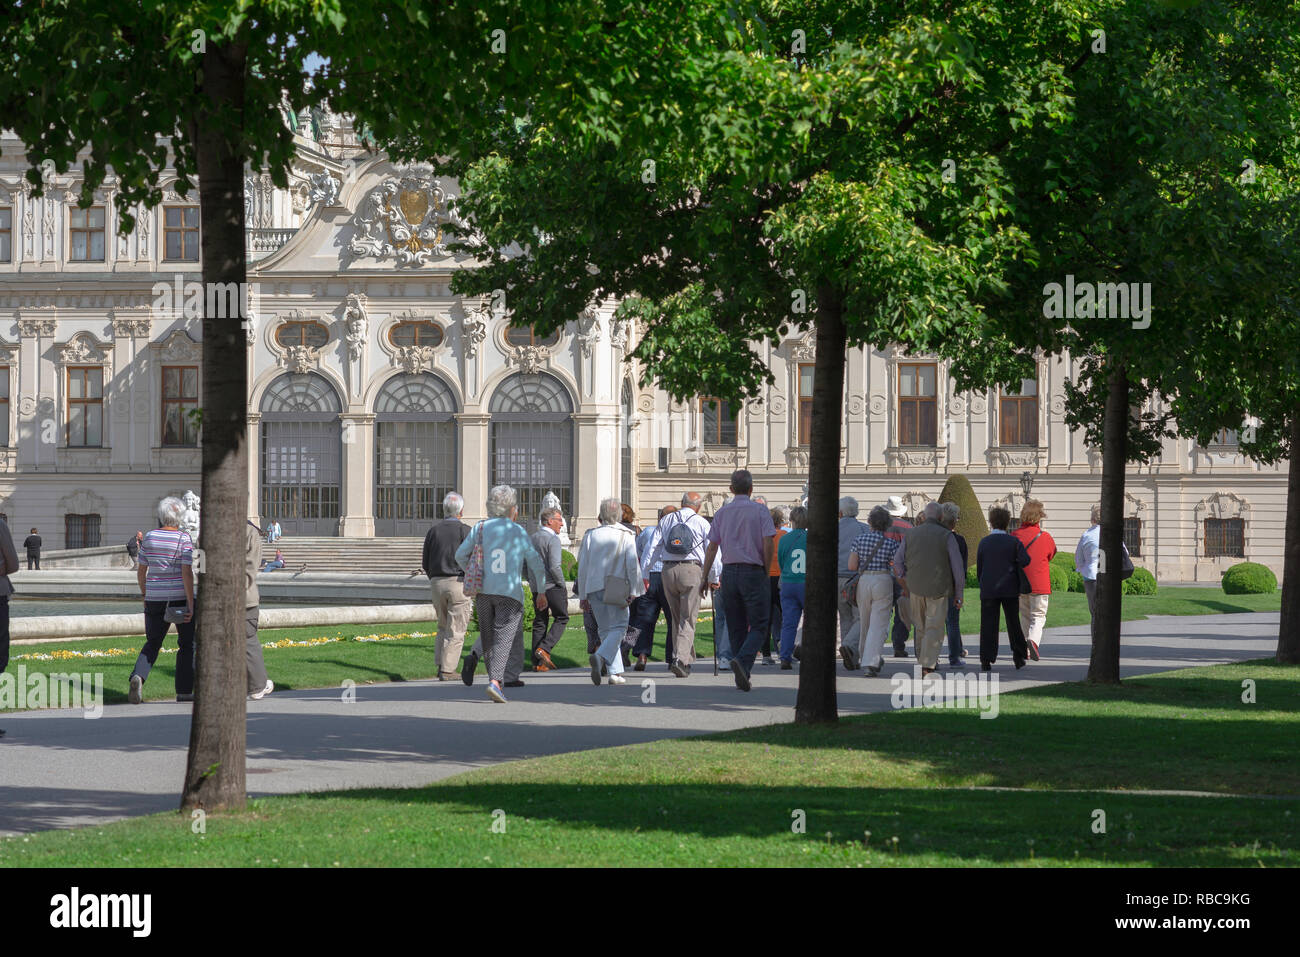 Tour group summer, visitors to the Schloss Belvedere Palace in Vienna tour its famous landscaped gardens, Wien, Austria. Stock Photo